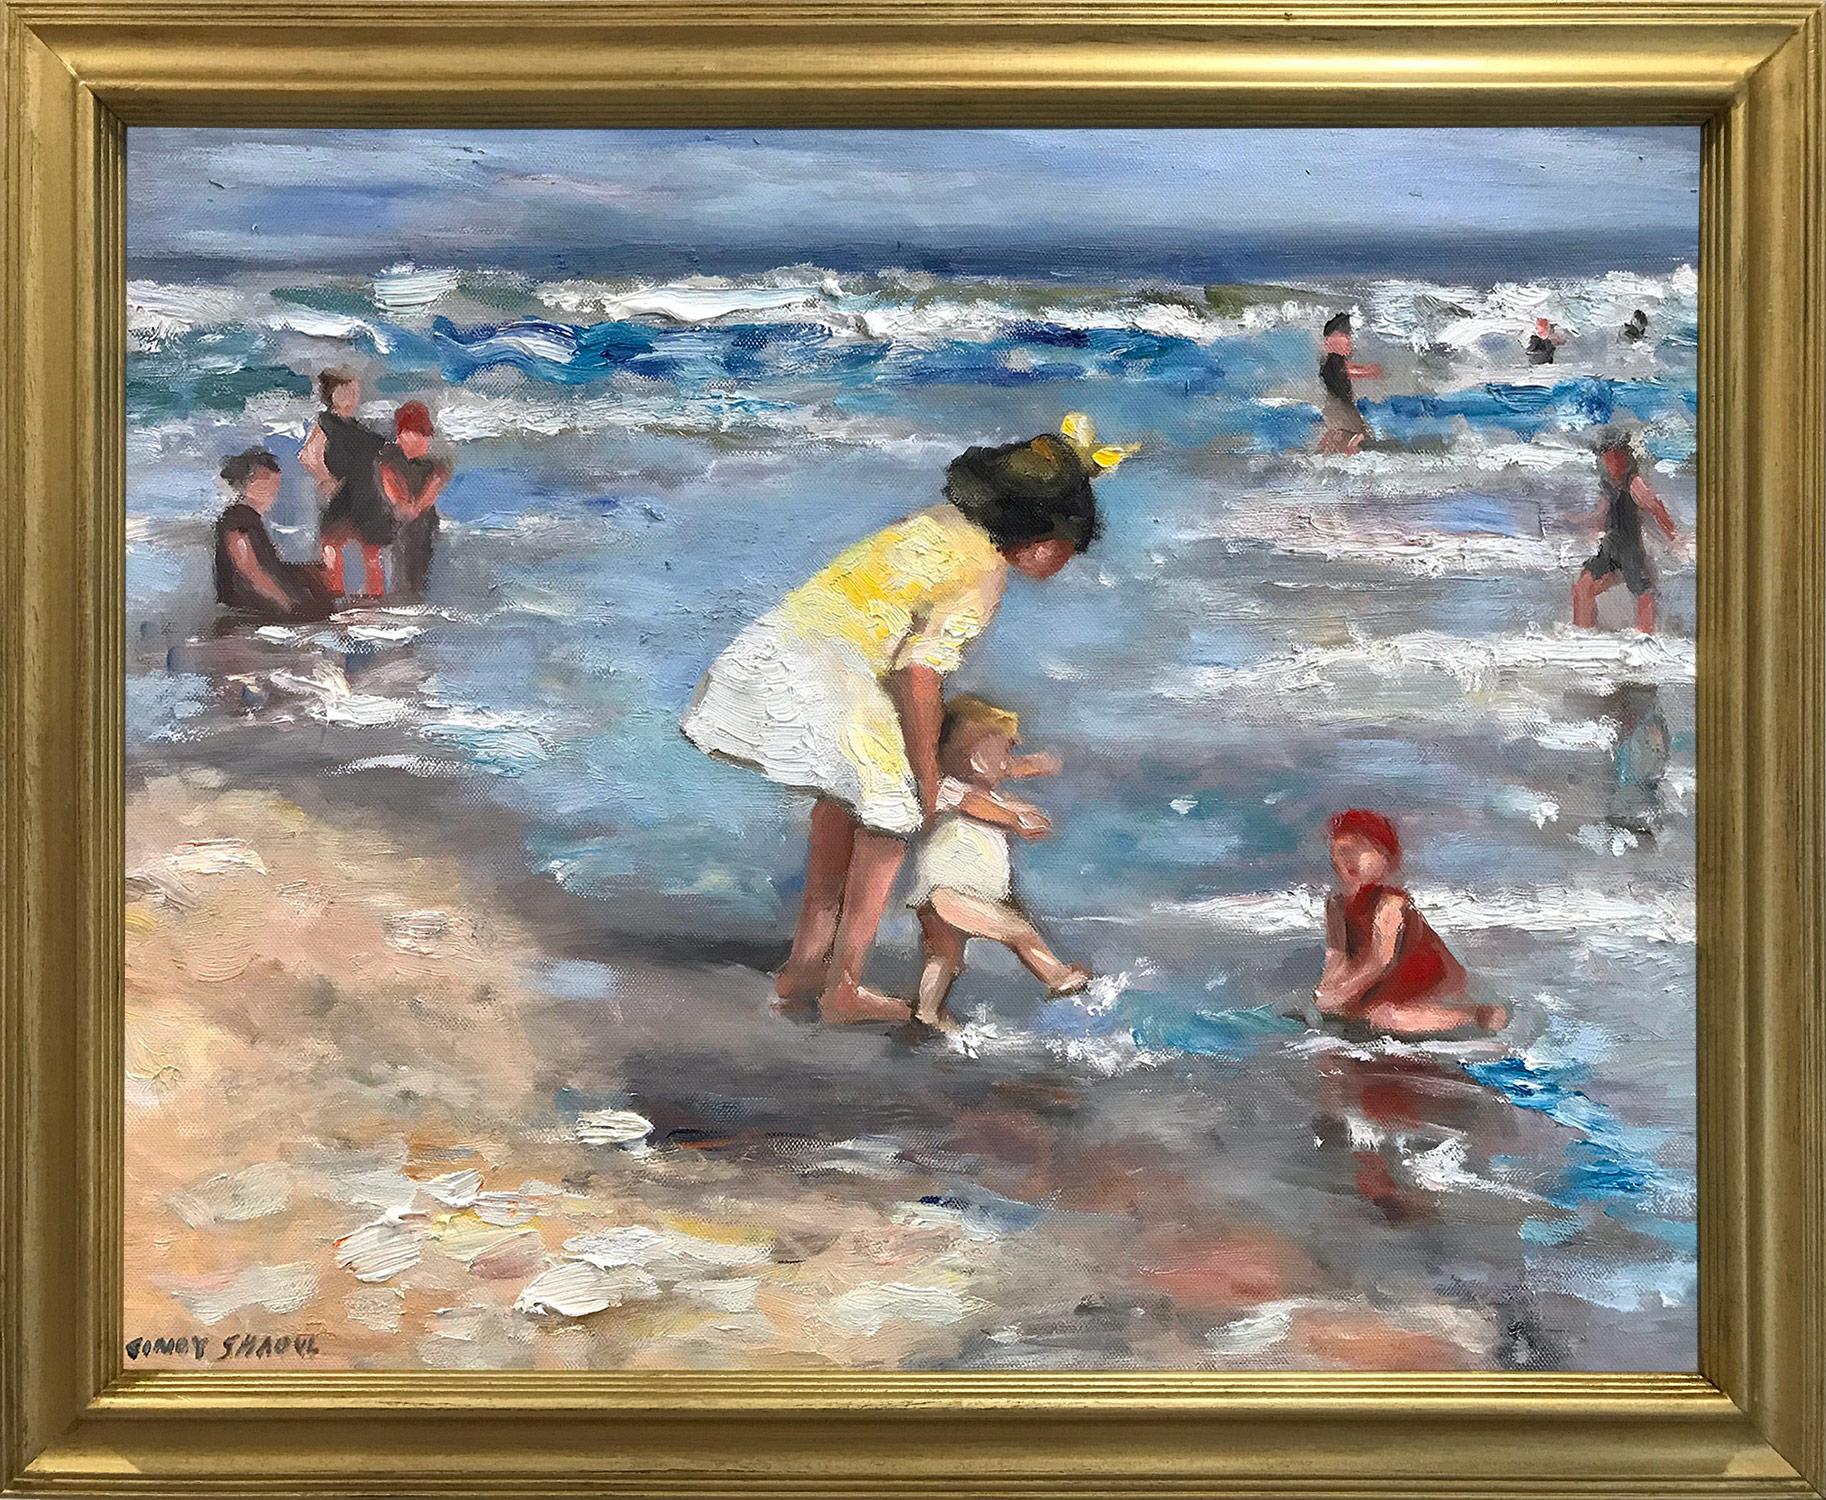 Cindy Shaoul Figurative Painting - "Playing at the Beach" Impressionistic Beach Scene Oil Painting on Canvas